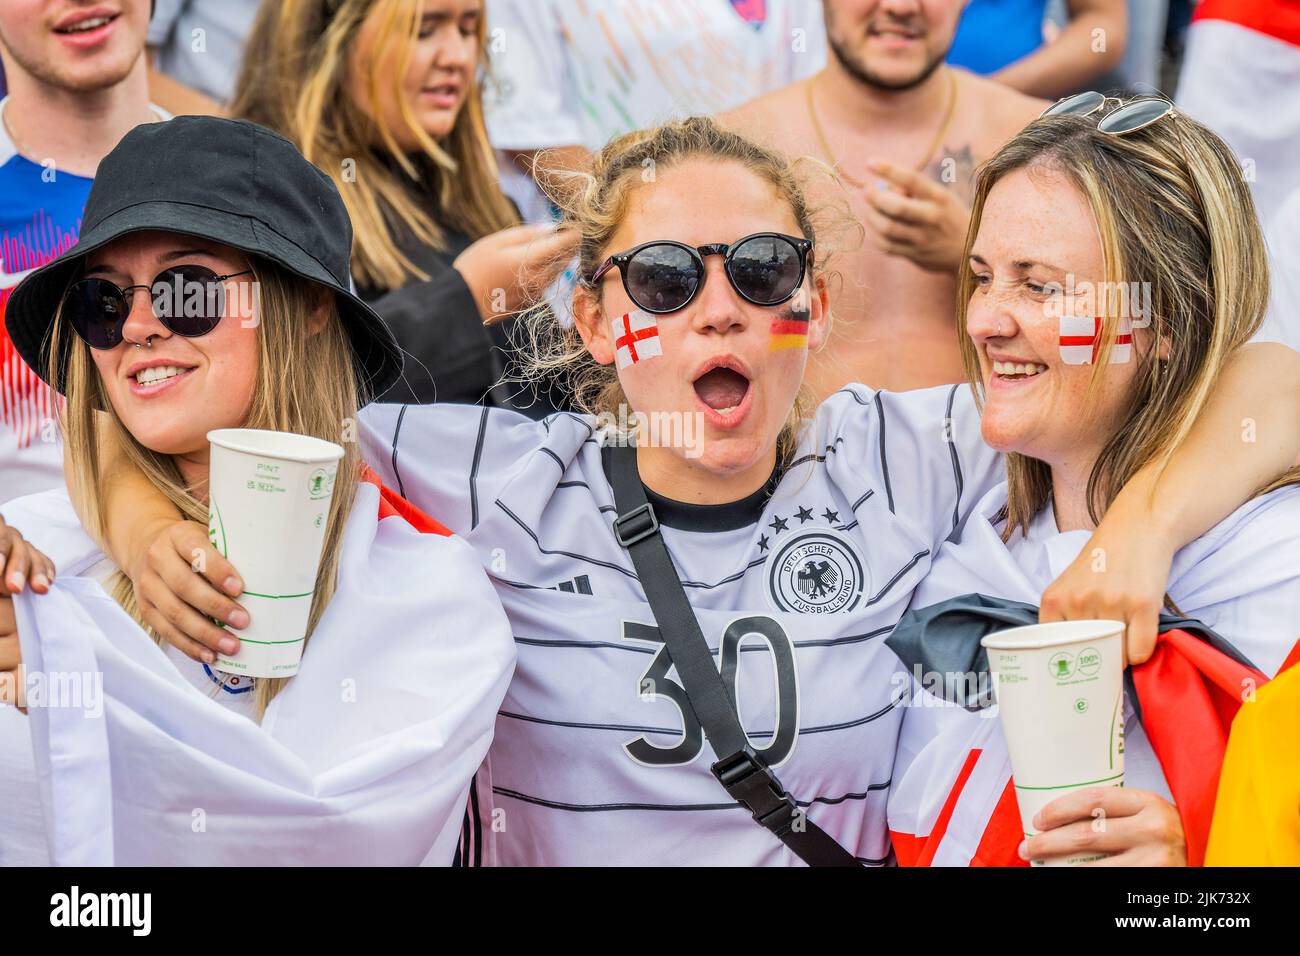 London, UK. 31st July, 2022. English and German Fans mingle happily - England v Germany UEFA Women's EURO 2022 final match fanzone in Trafalgar Square. Organised by the Mayor of London Sadiq Khan, and tournament organisers. It offered free access for up to 7,000 supporters. Credit: Guy Bell/Alamy Live News Stock Photo